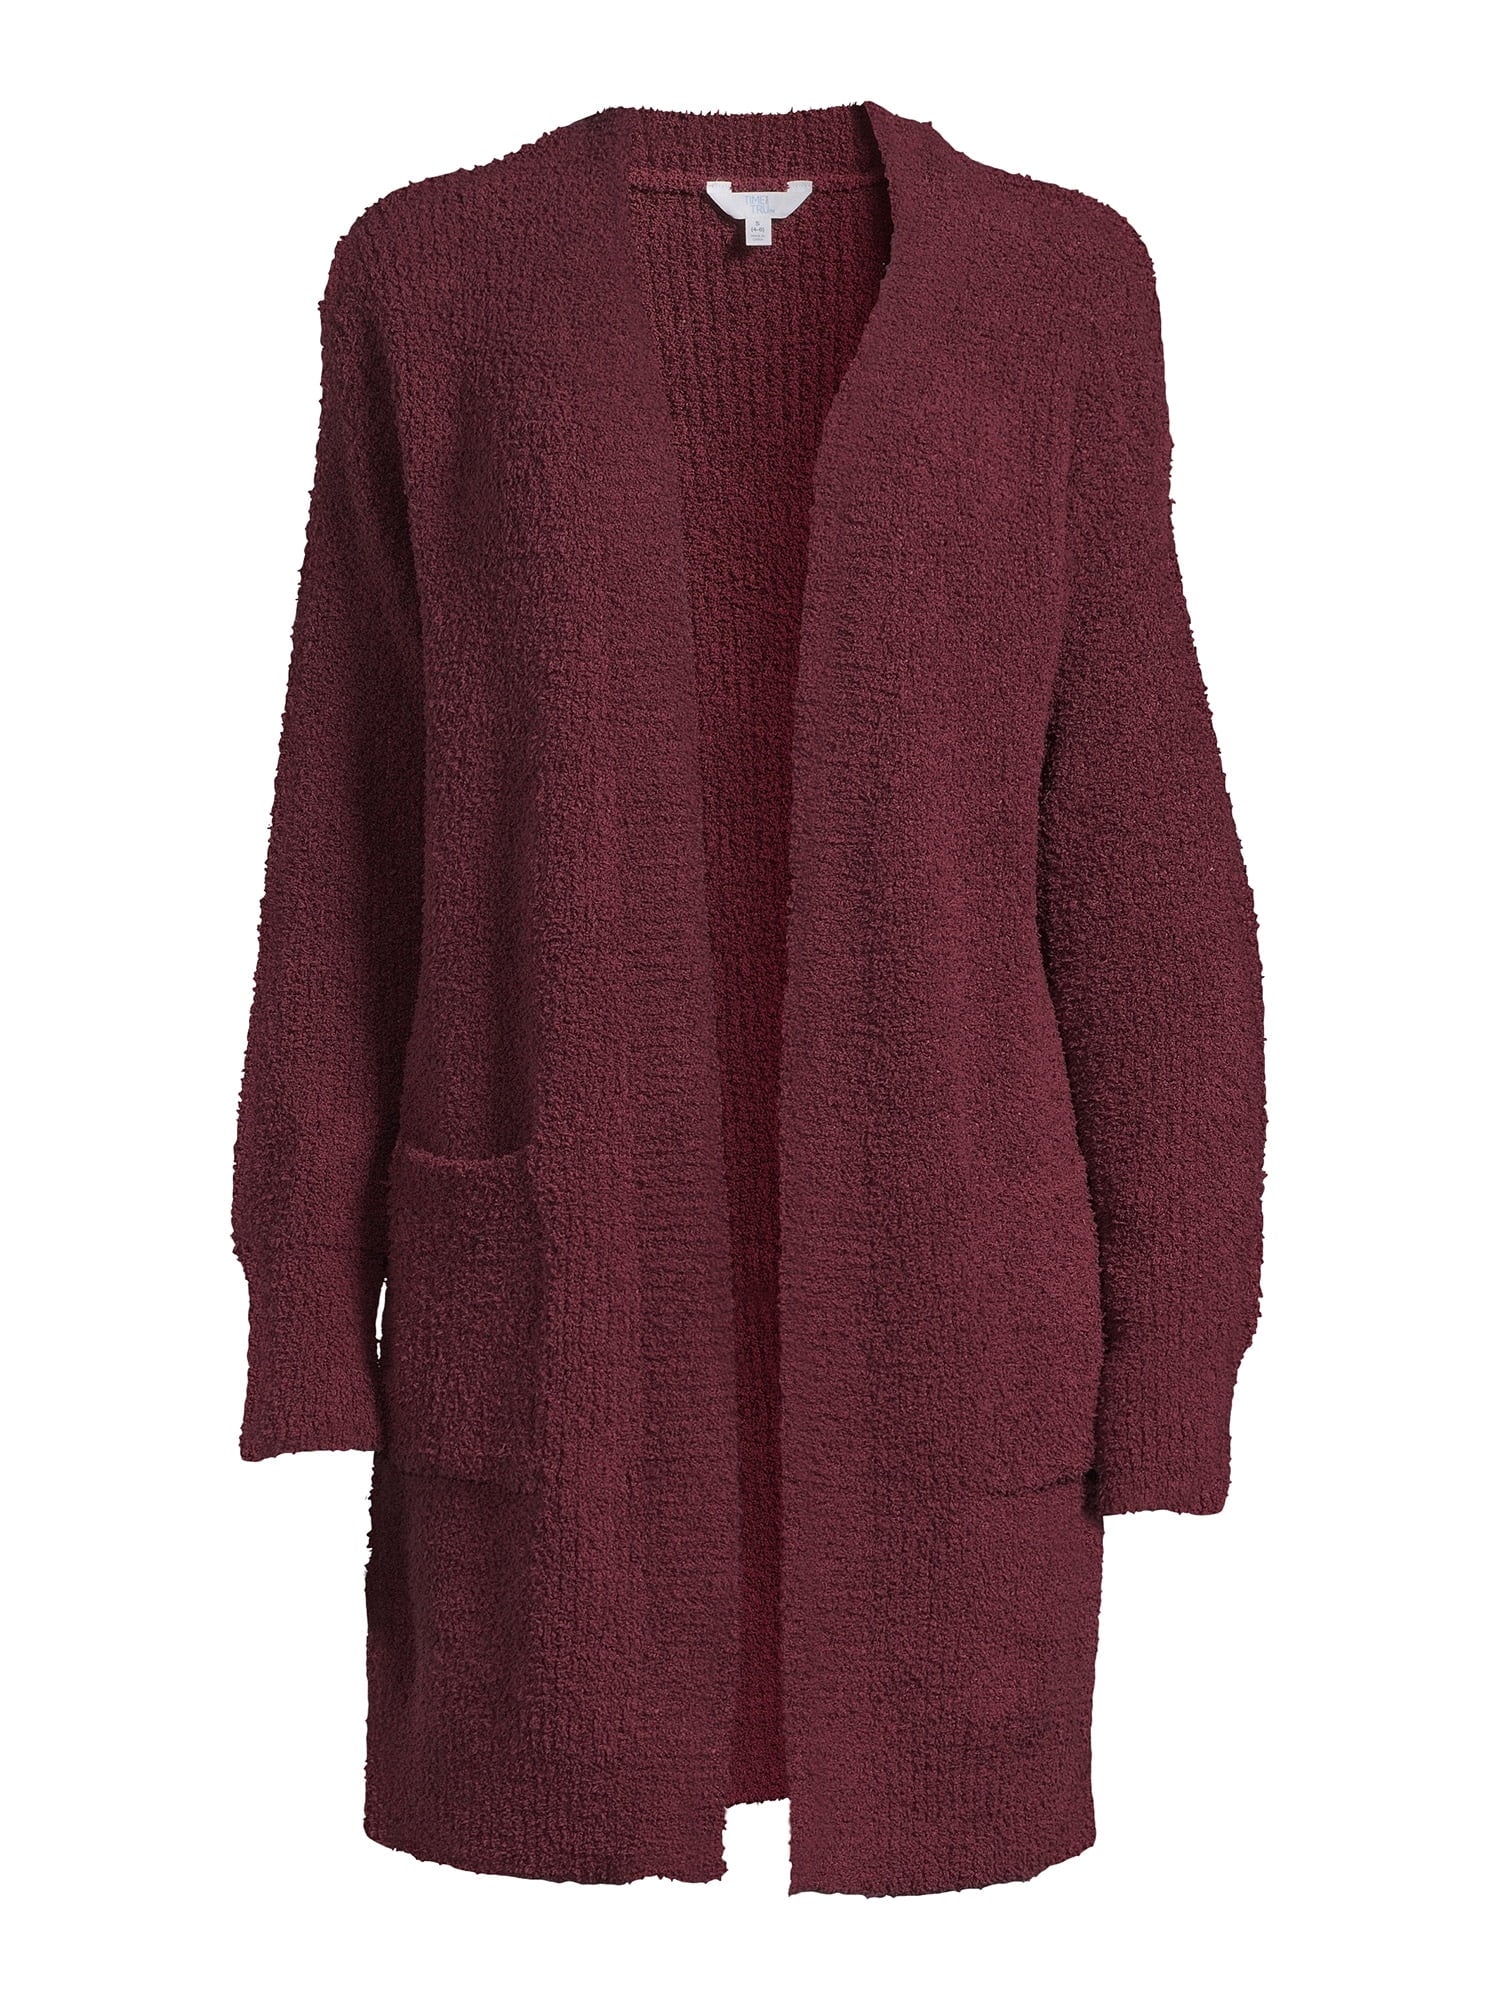 Time and Tru Women's Duster Cardigan Sweater, Midweight, Sizes XS-XXXL - image 2 of 5